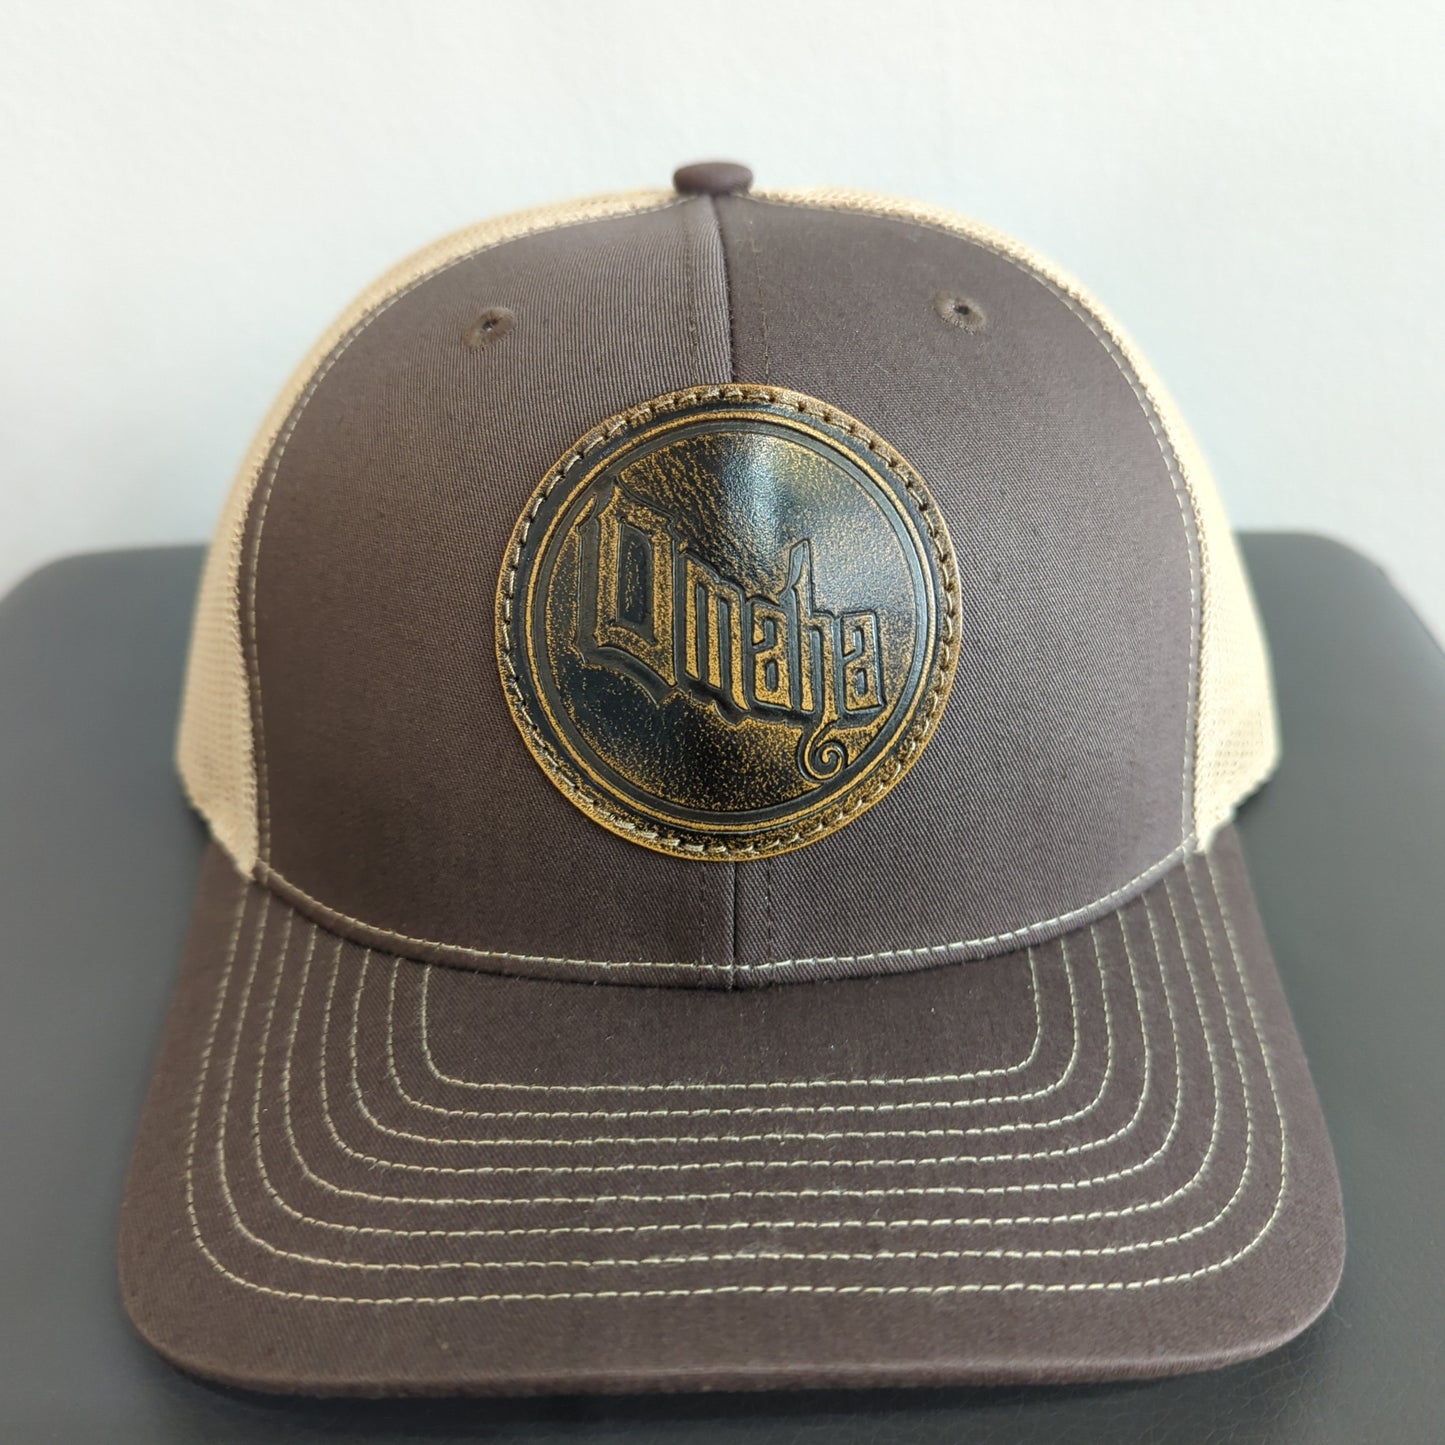 Omaha round patch hat